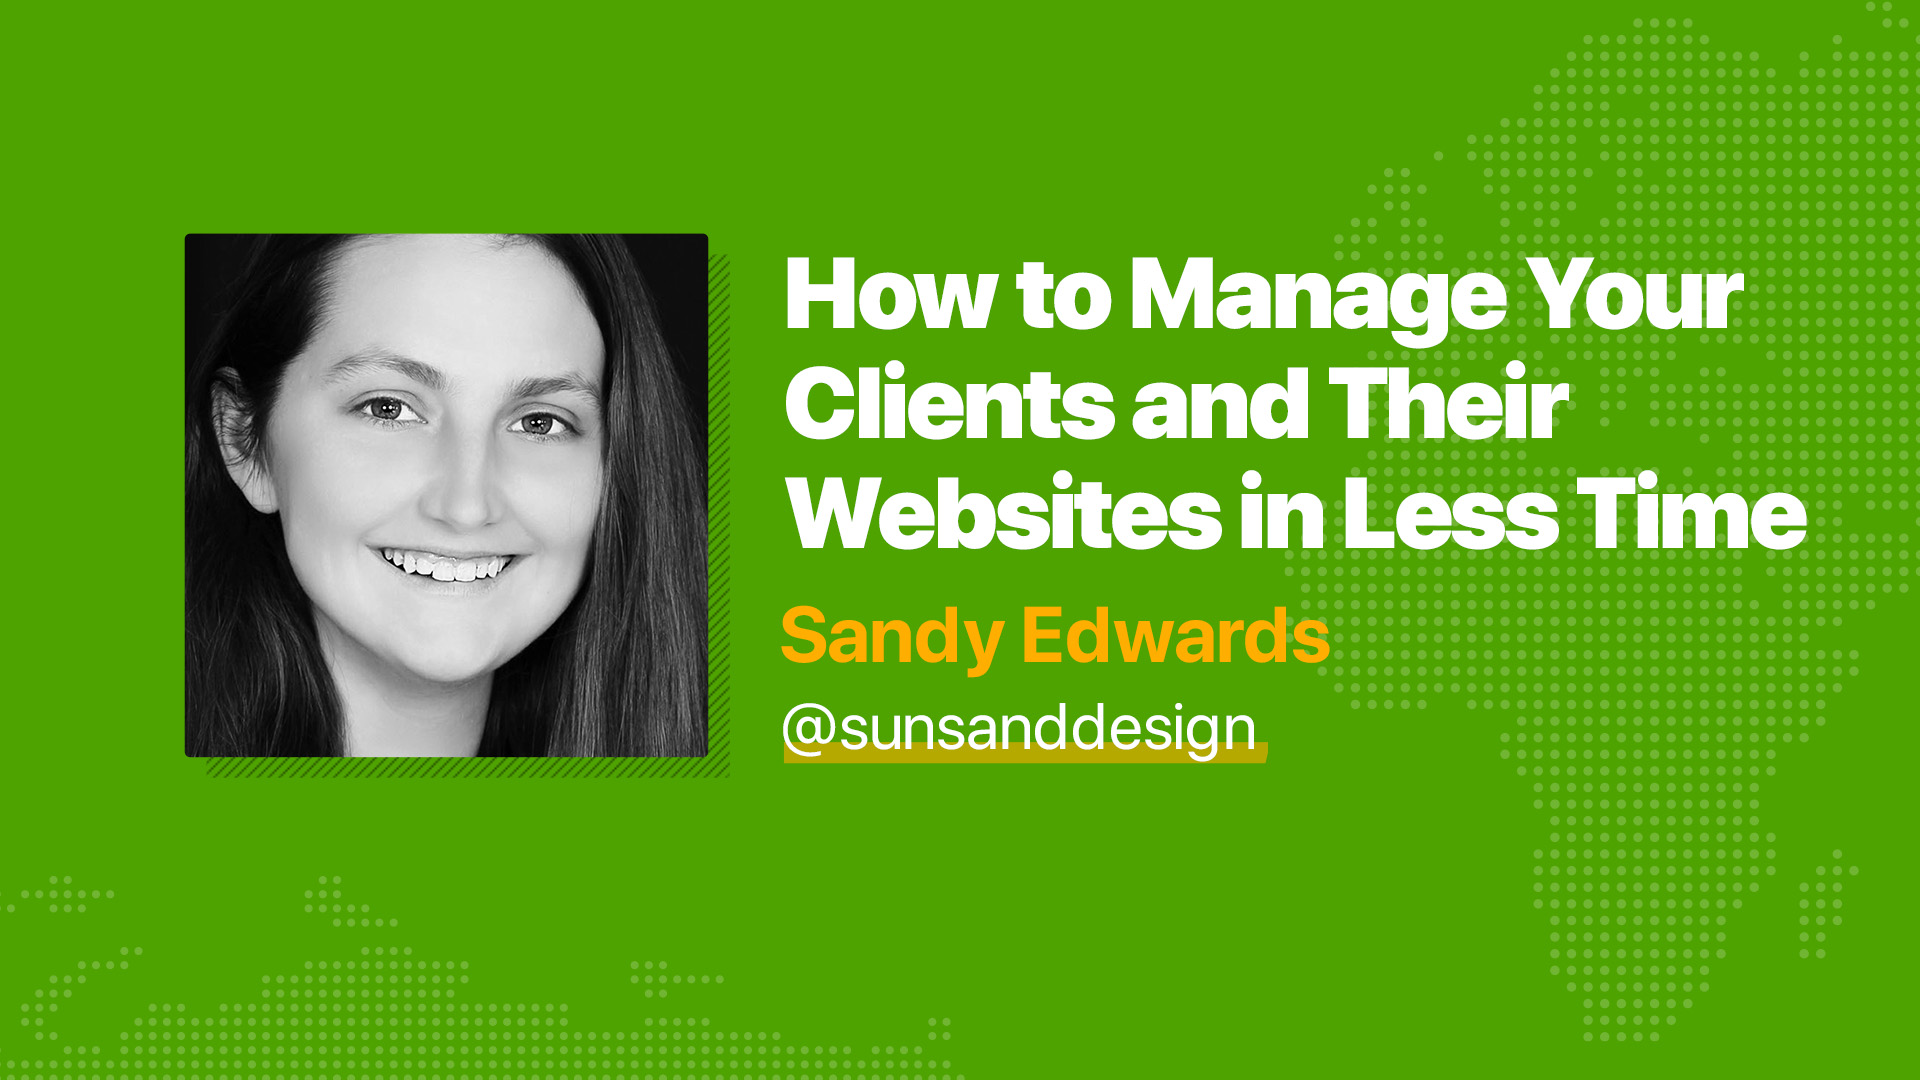 How to Manage Your Clients and their Websites in Less Time - Sandy Edwards